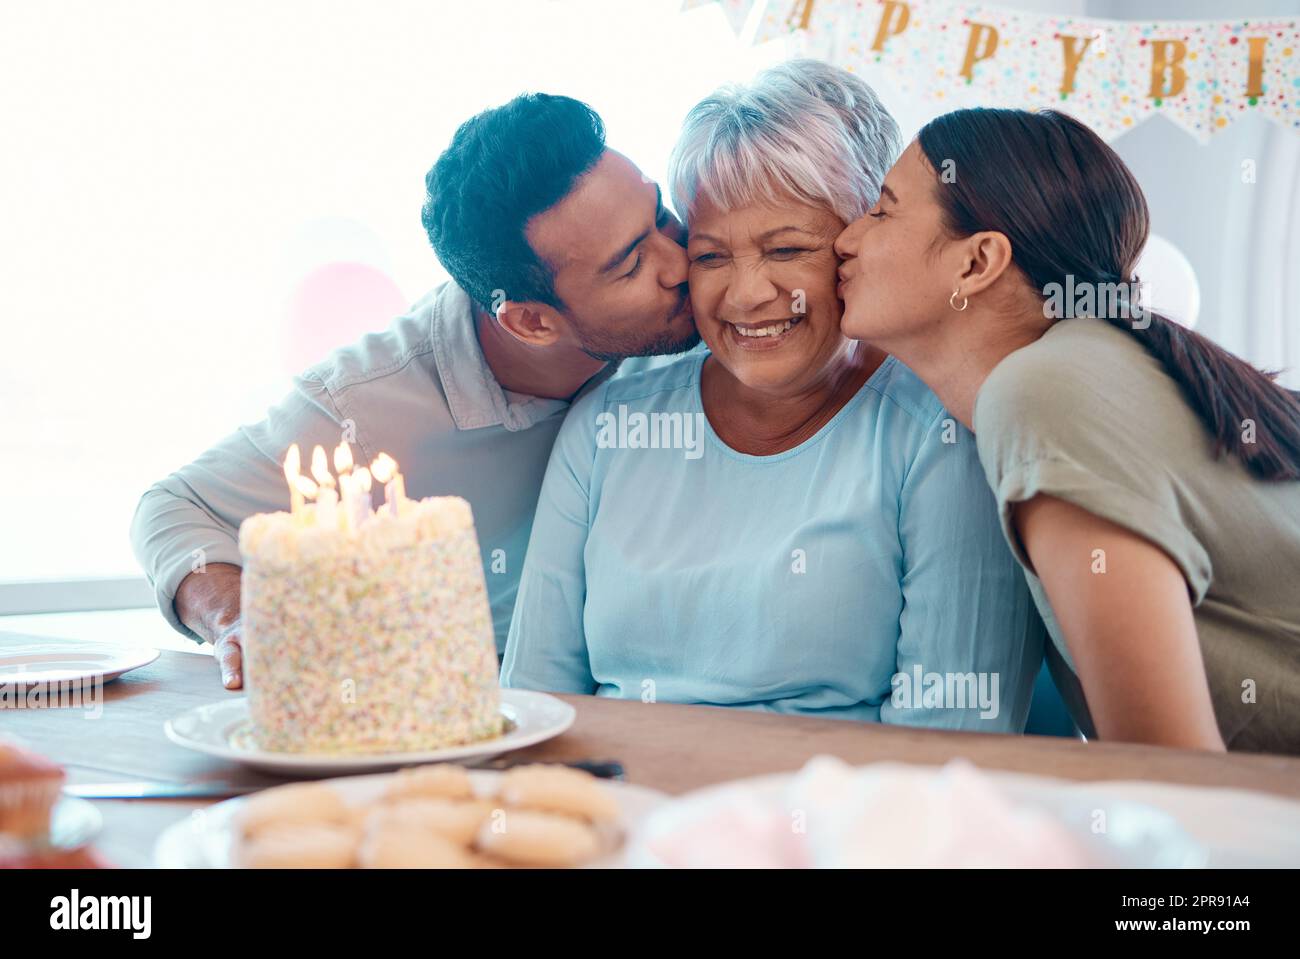 Smooch. two young adults celebrating a birthday with a mature woman at home. Stock Photo